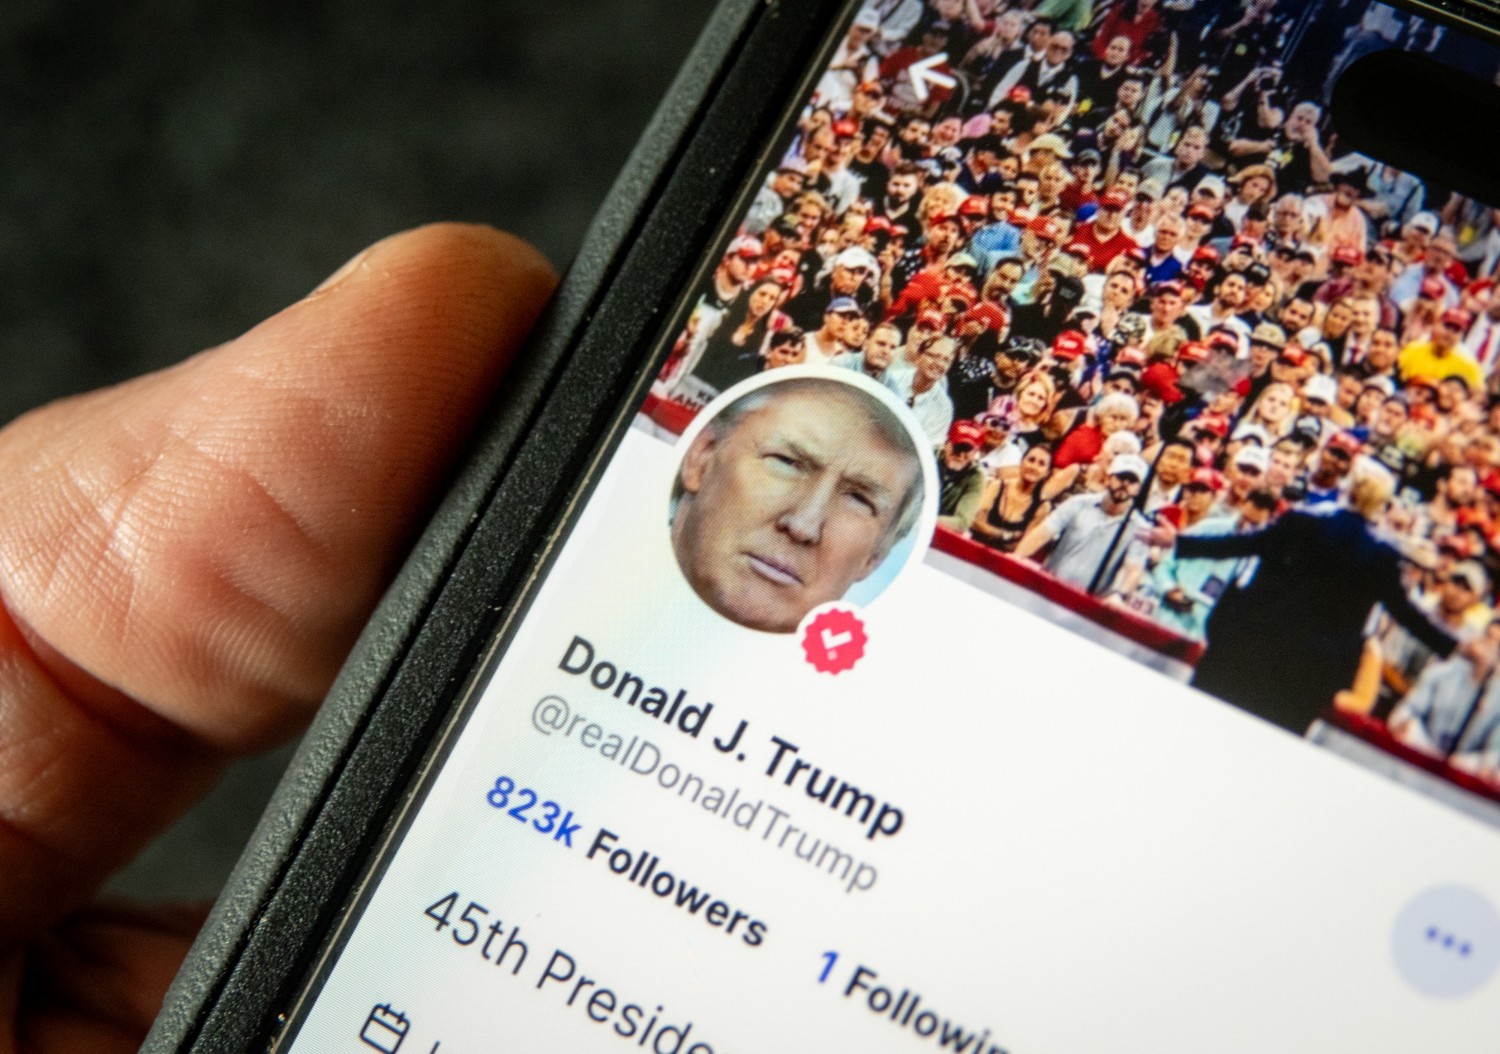 Among other things, the Court's Netchoice decision means that social media companies may ban Donald Trump. Anna Barclay/Getty Image